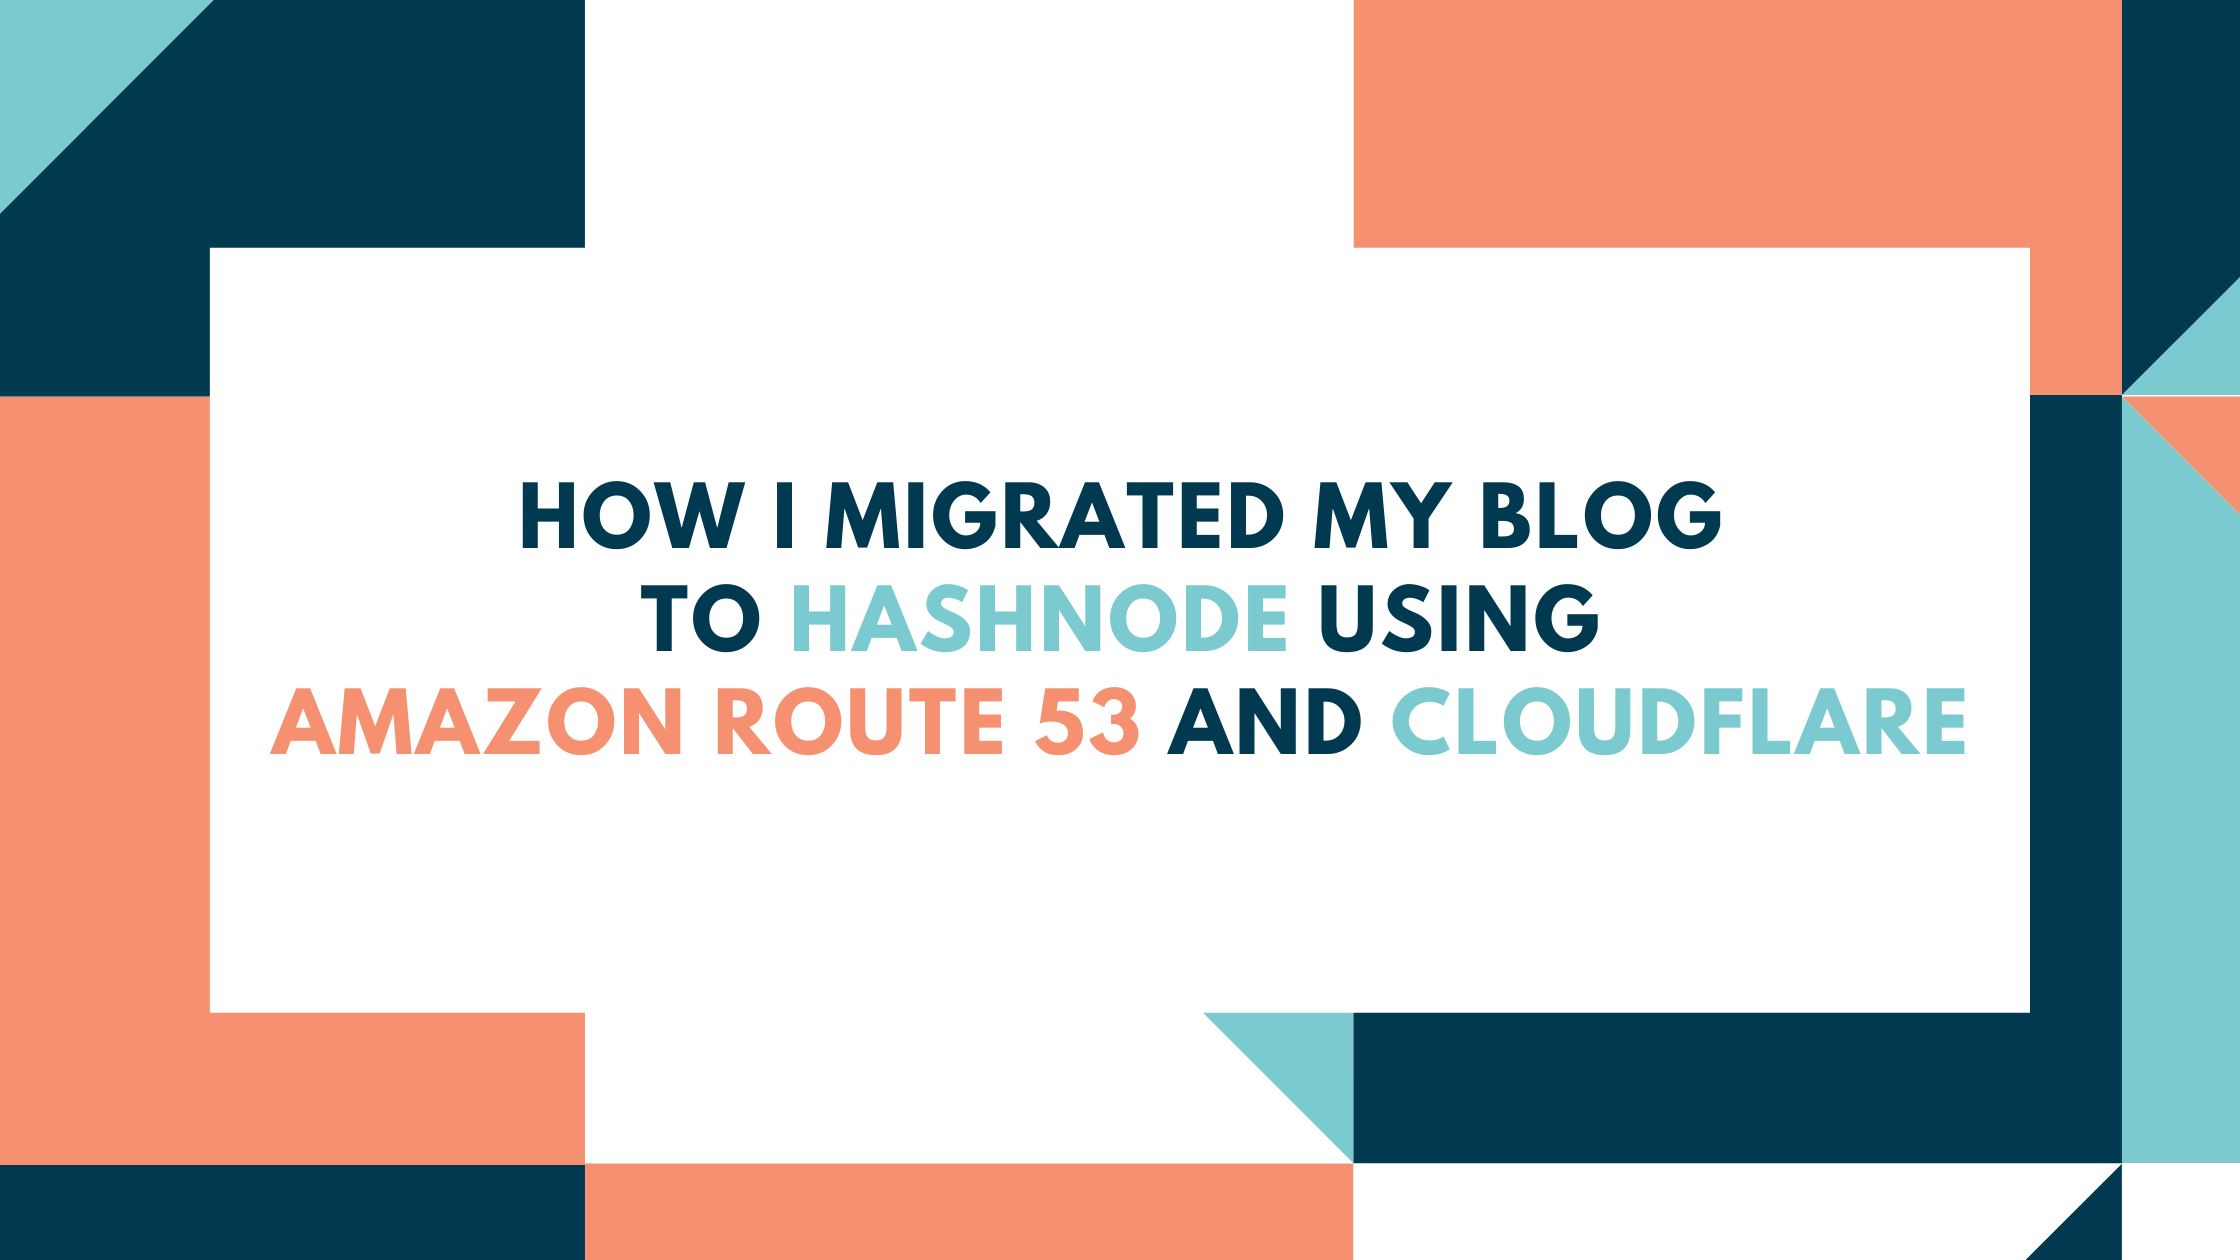 How I Migrated My Blog to Hashnode Using Amazon Route 53 and Cloudflare